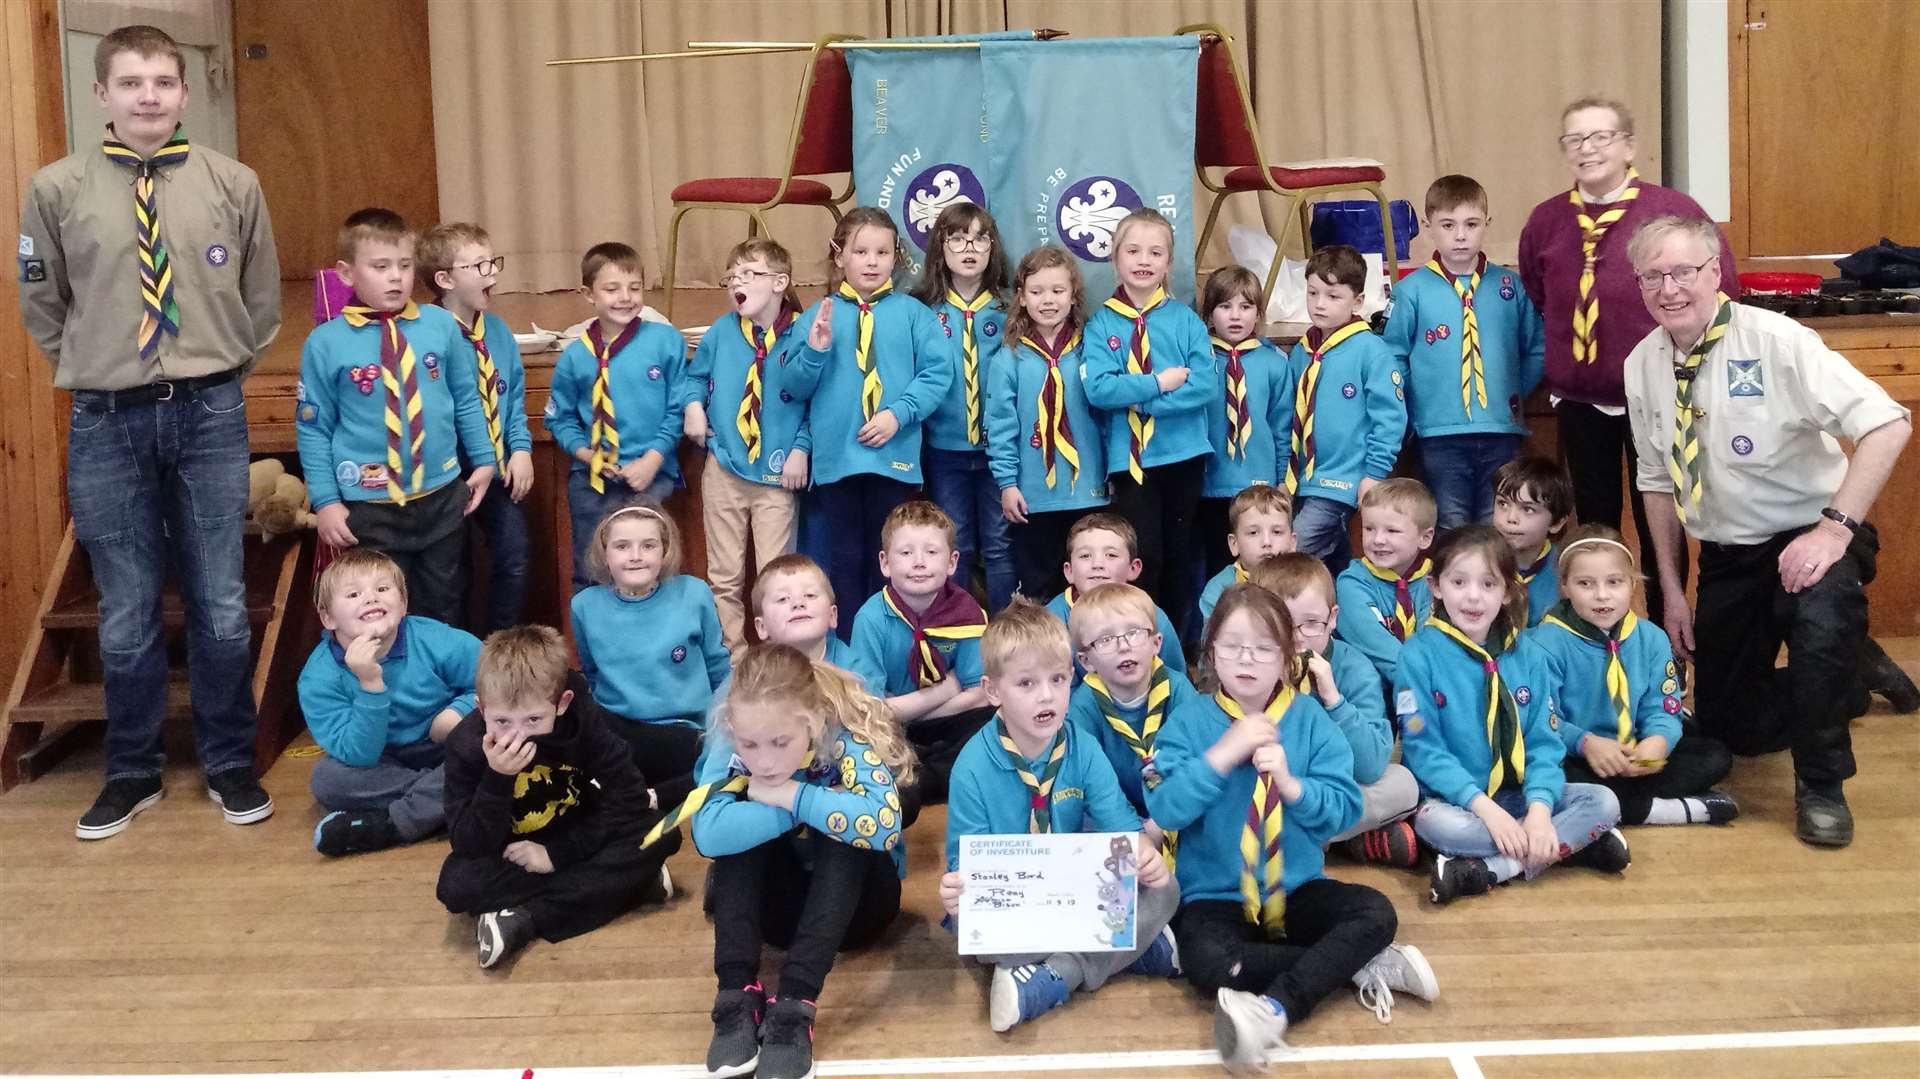 Pictured at their games night are 2nd Thurso Beavers and Reay Beavers.